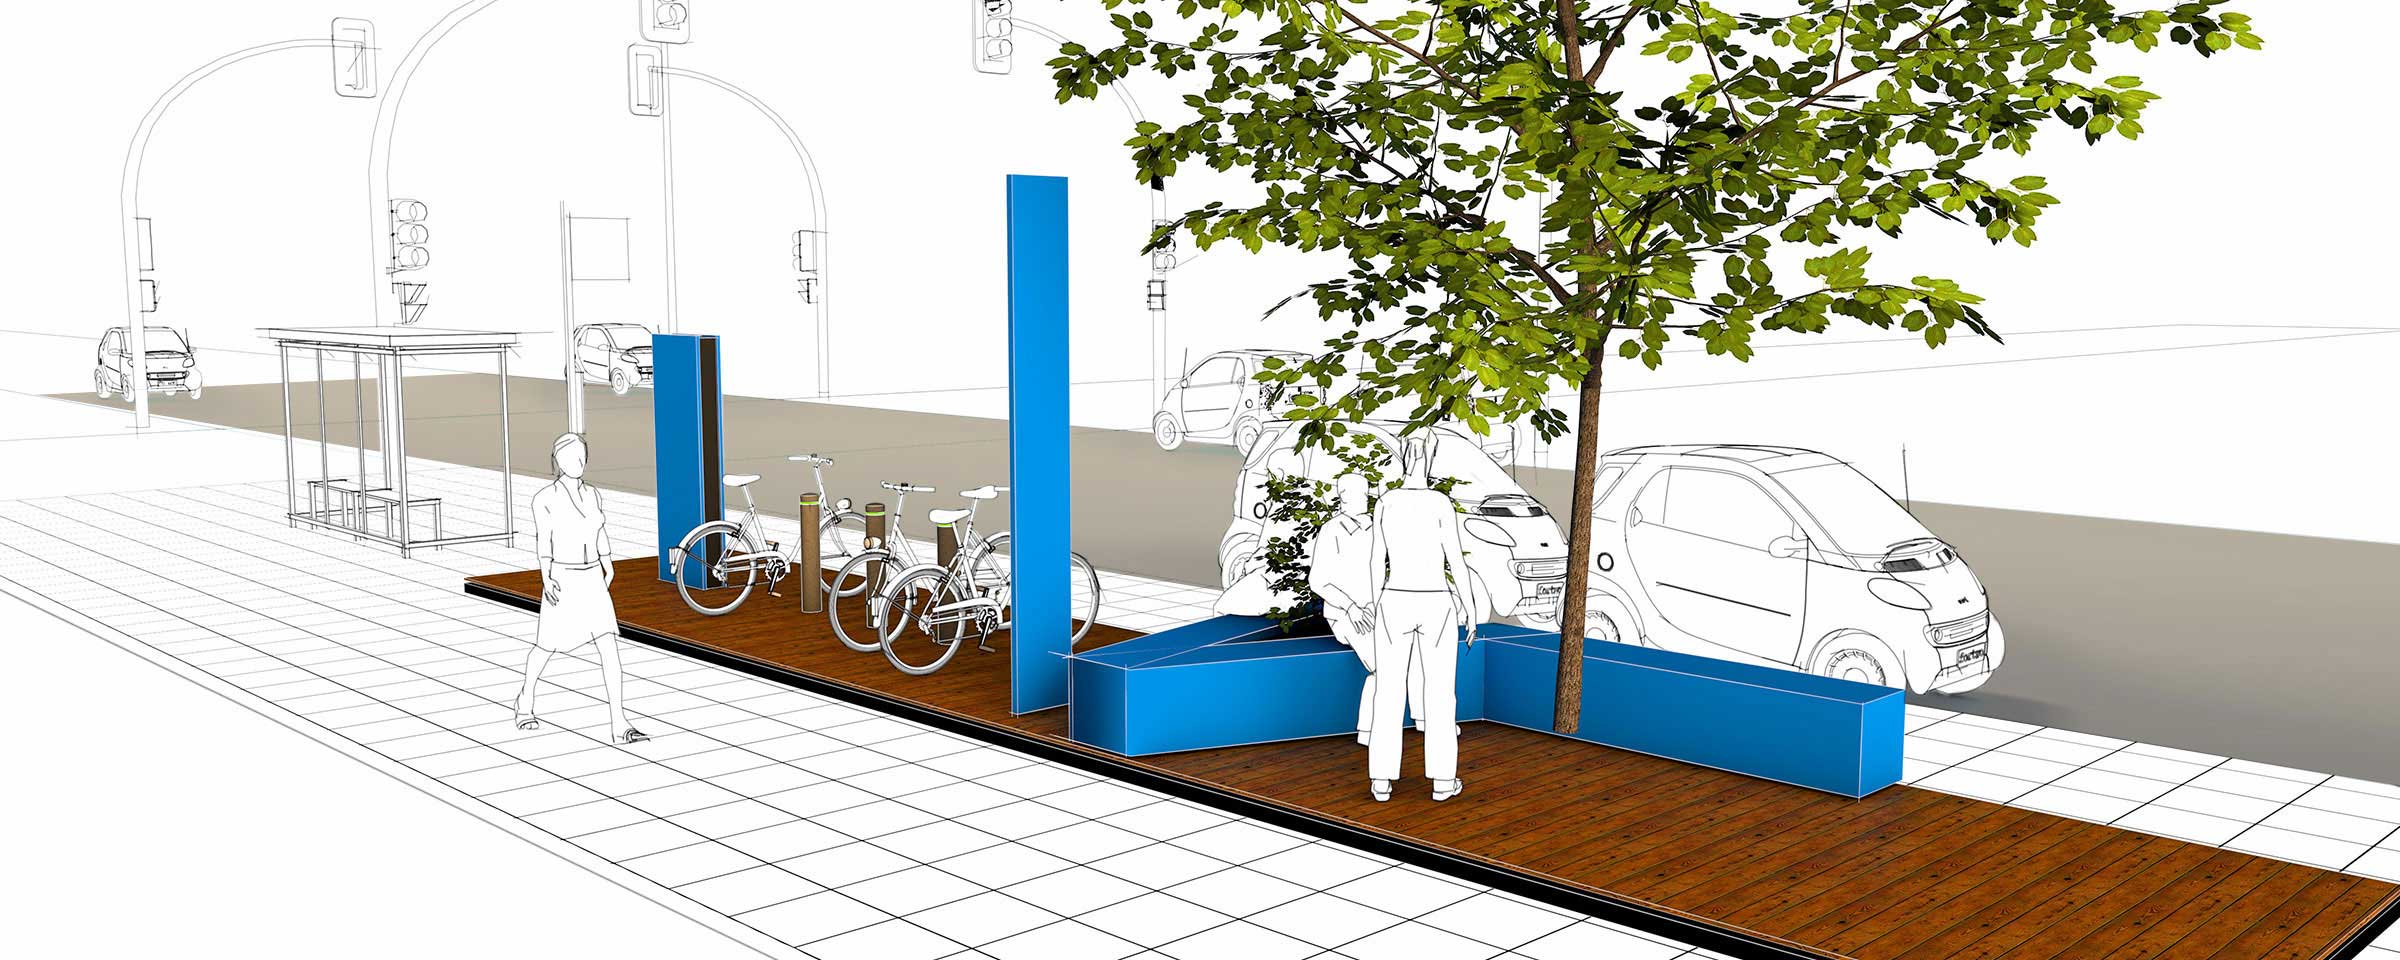 Visualization of a Parklet with bicycle parking, seating and a tree